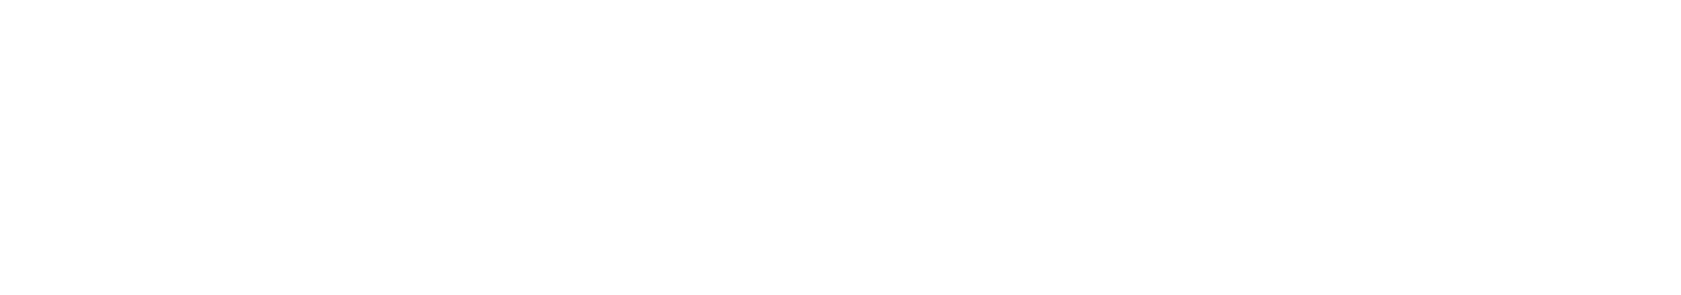 Department of Industry Innovation and Science and Business Cooperative Research Centres Program